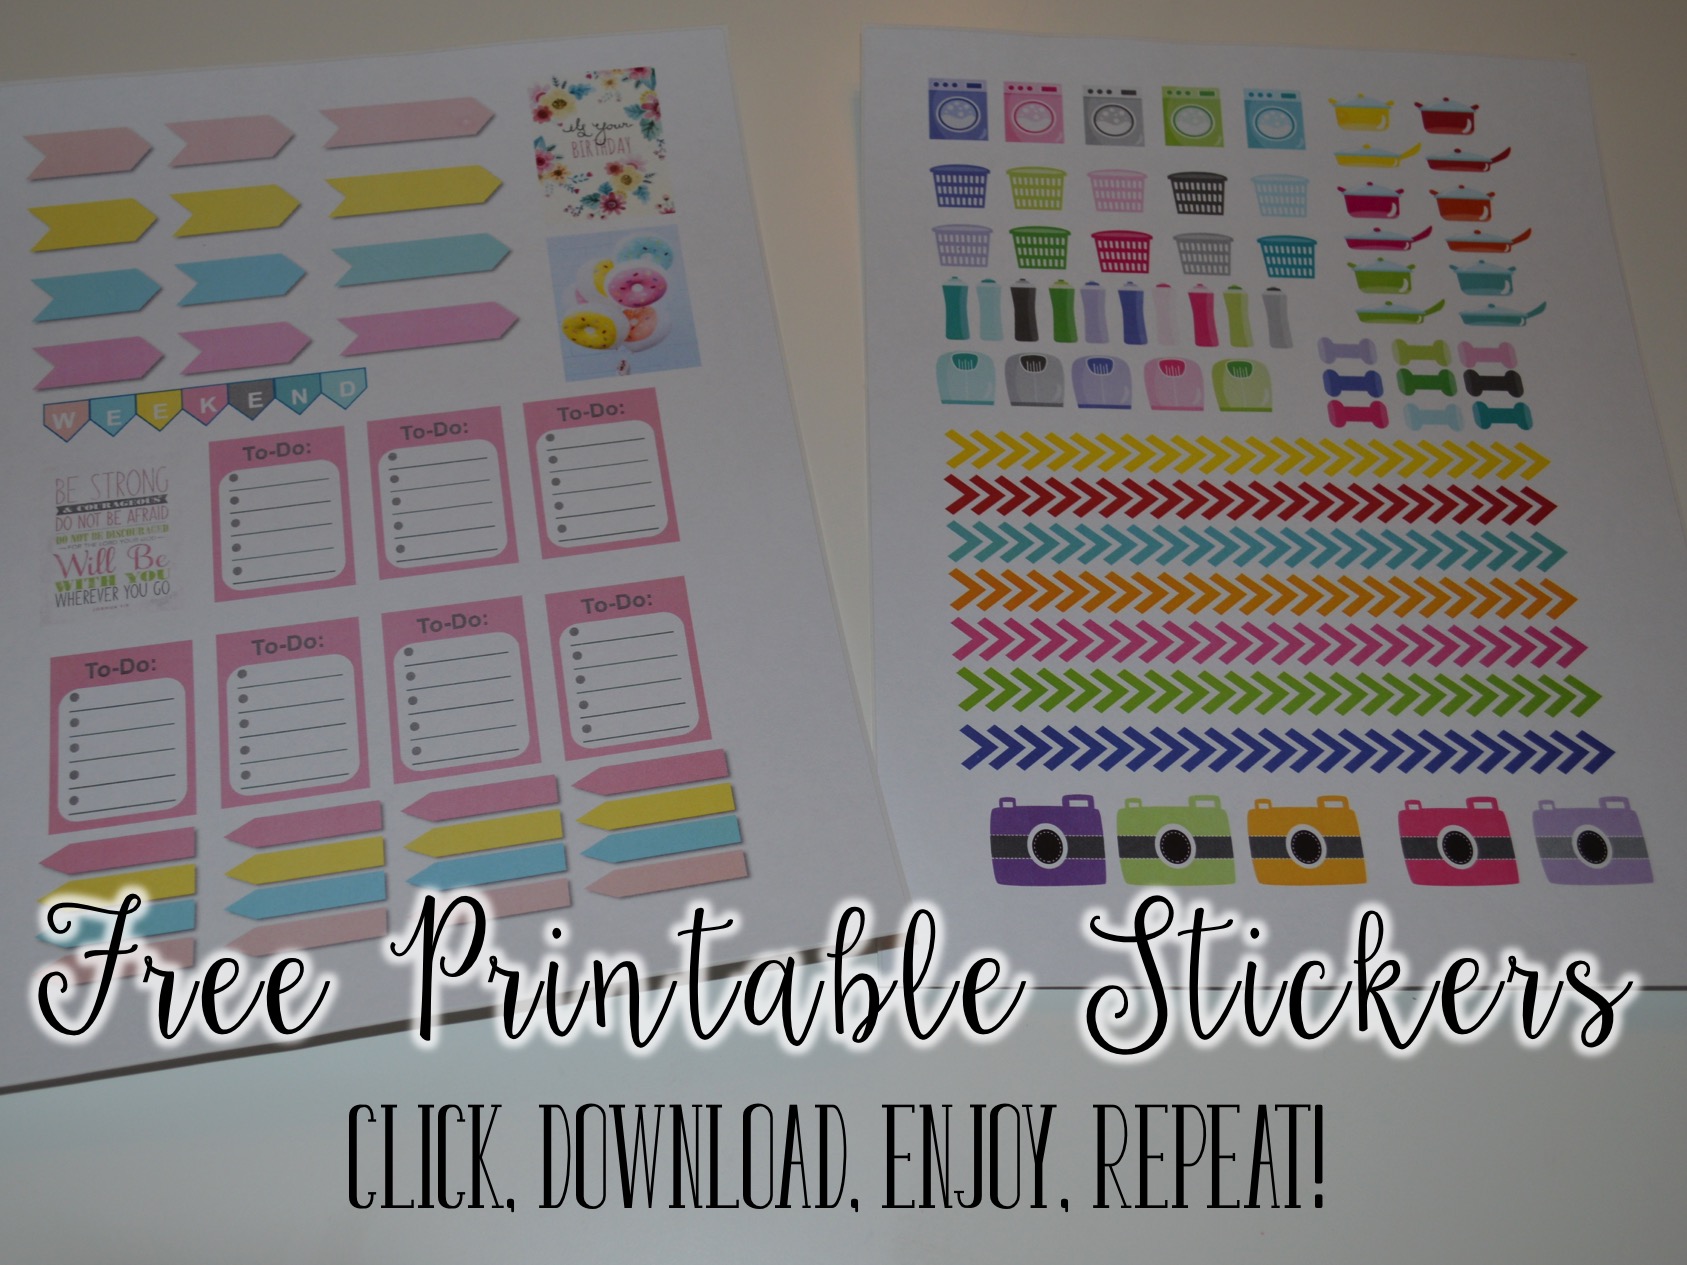 Want to know how to make planner stickers? Take a look! We can have your planner printables ready for your Erin Condren planner. Your planner organization will be envied far and wide!